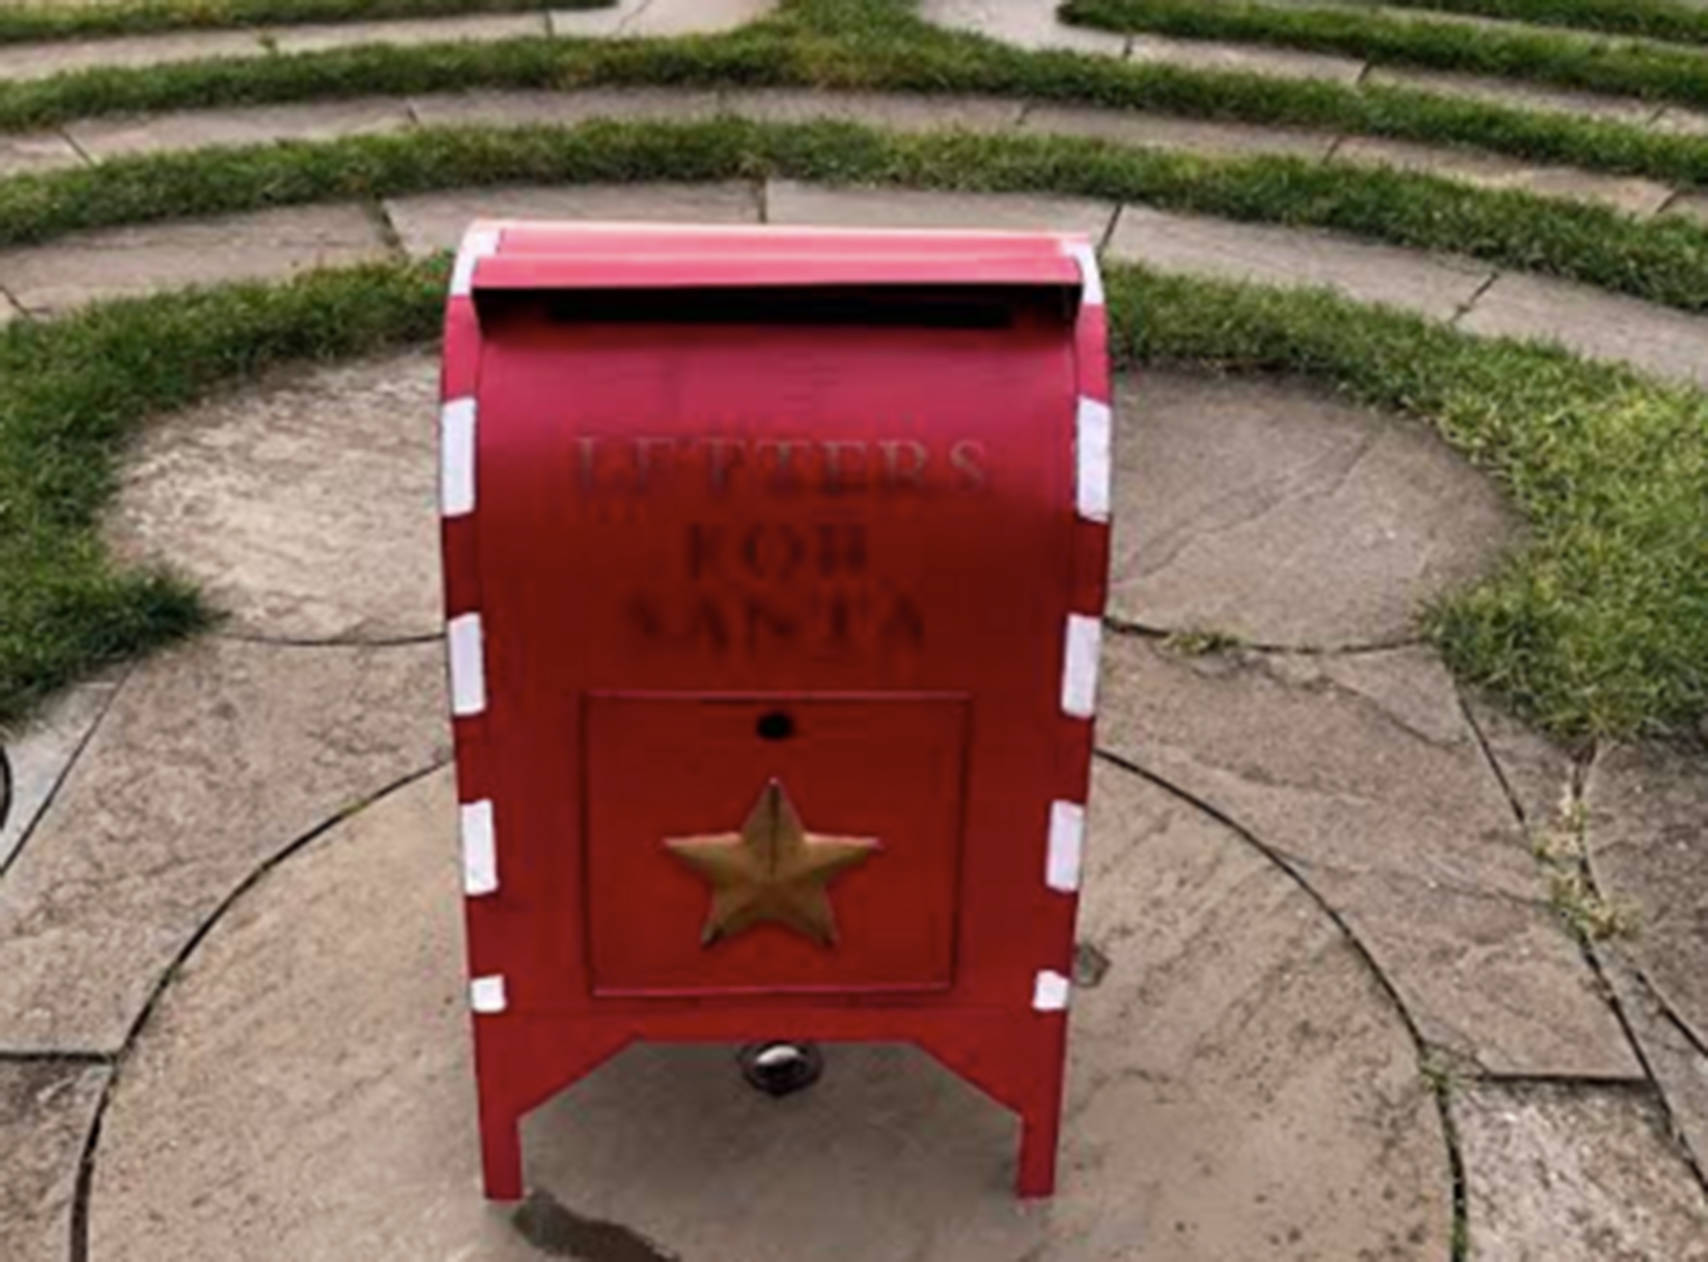 Contributed photo
Santa's Letter Mailbox in the Labyrinth.